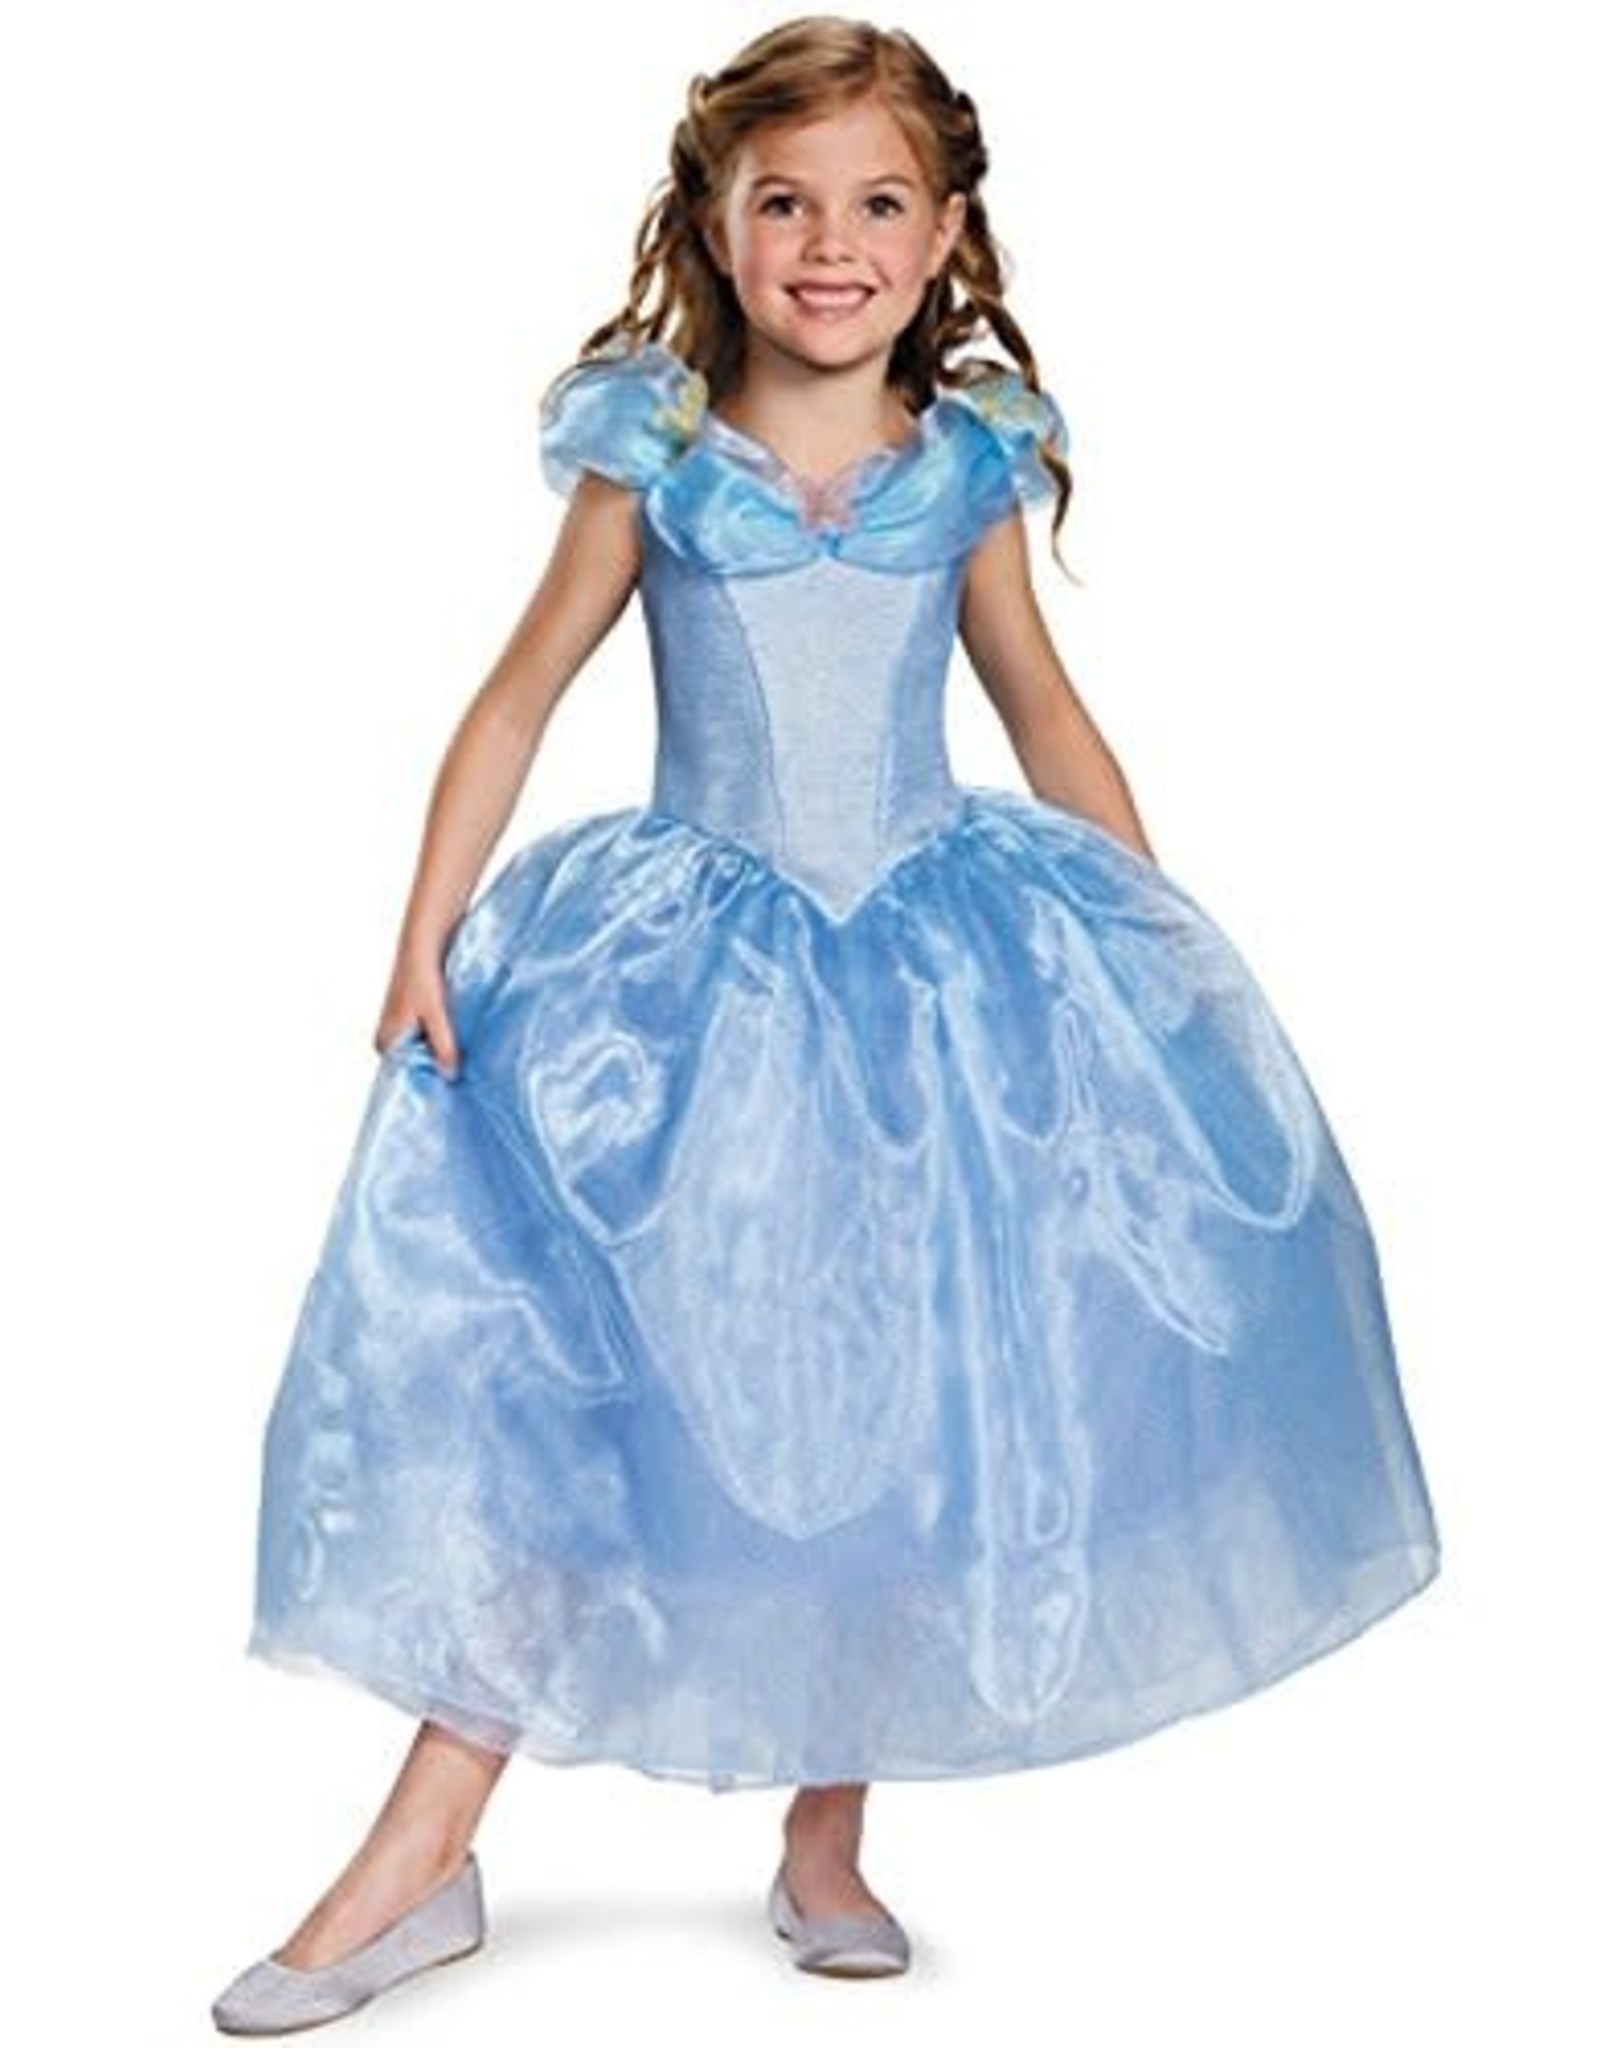 Disguise Inc Cinderella, Blue, S - Small , 87063